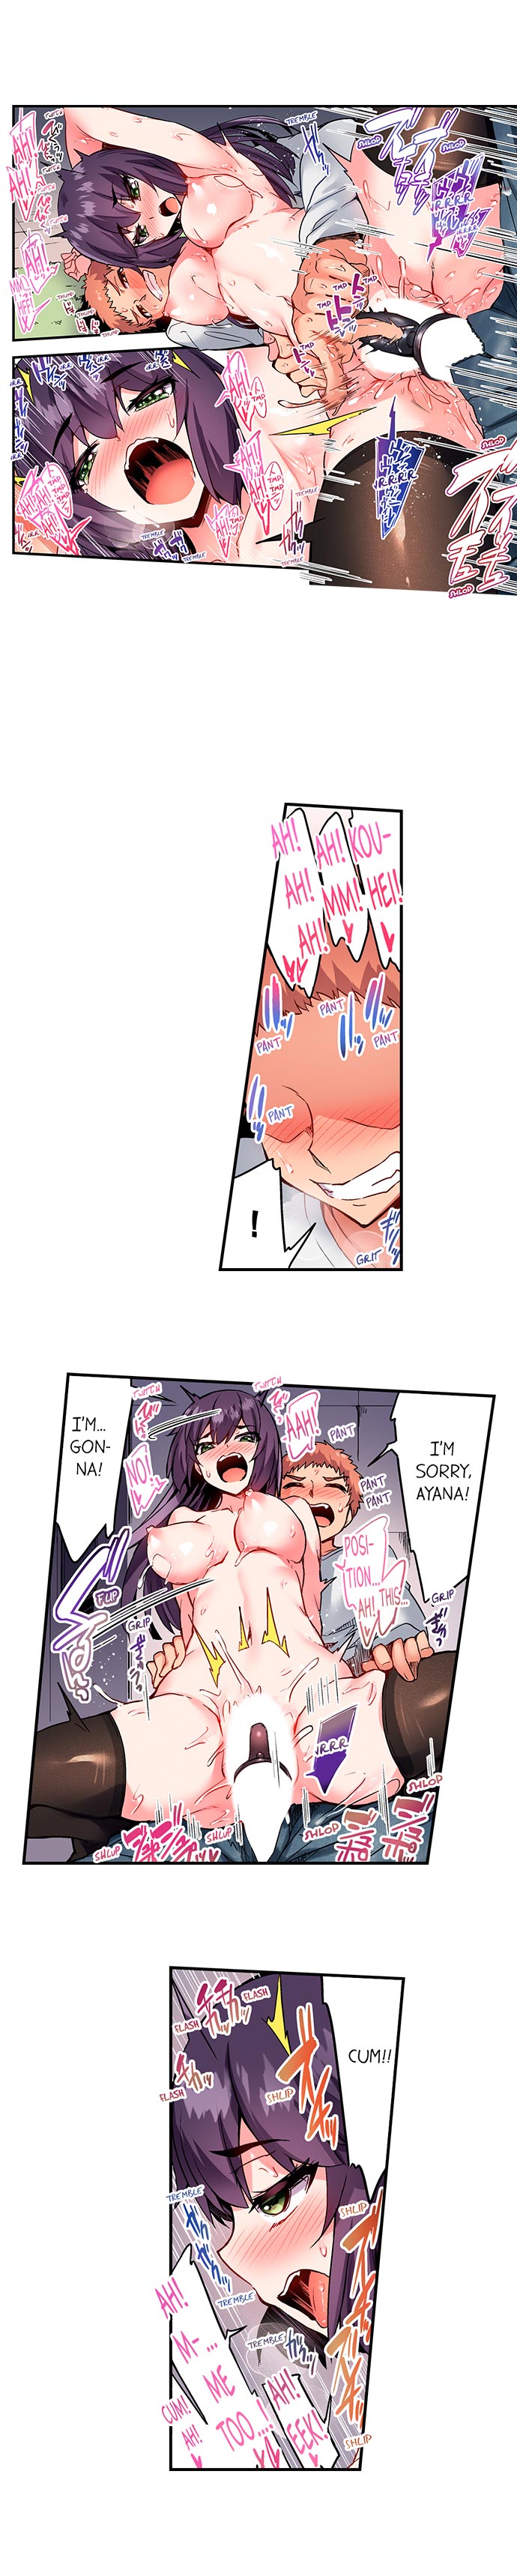 Traditional Job of Washing Girls’ Body - Chapter 126 Page 7